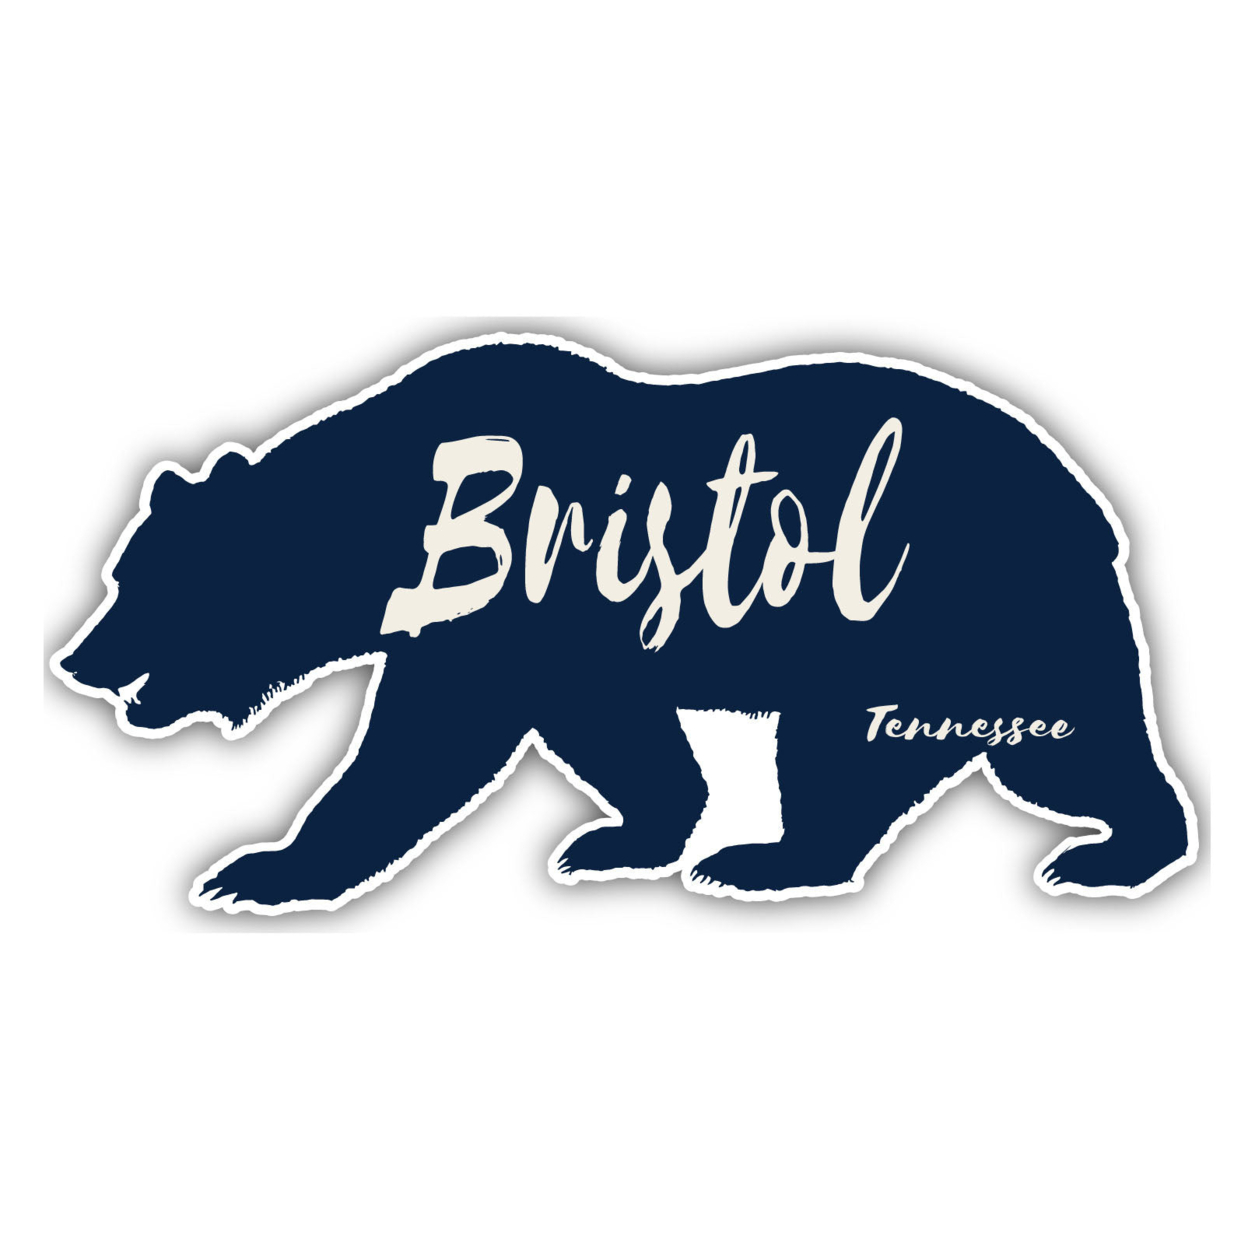 Bristol Tennessee Souvenir Decorative Stickers (Choose Theme And Size) - 4-Pack, 4-Inch, Tent